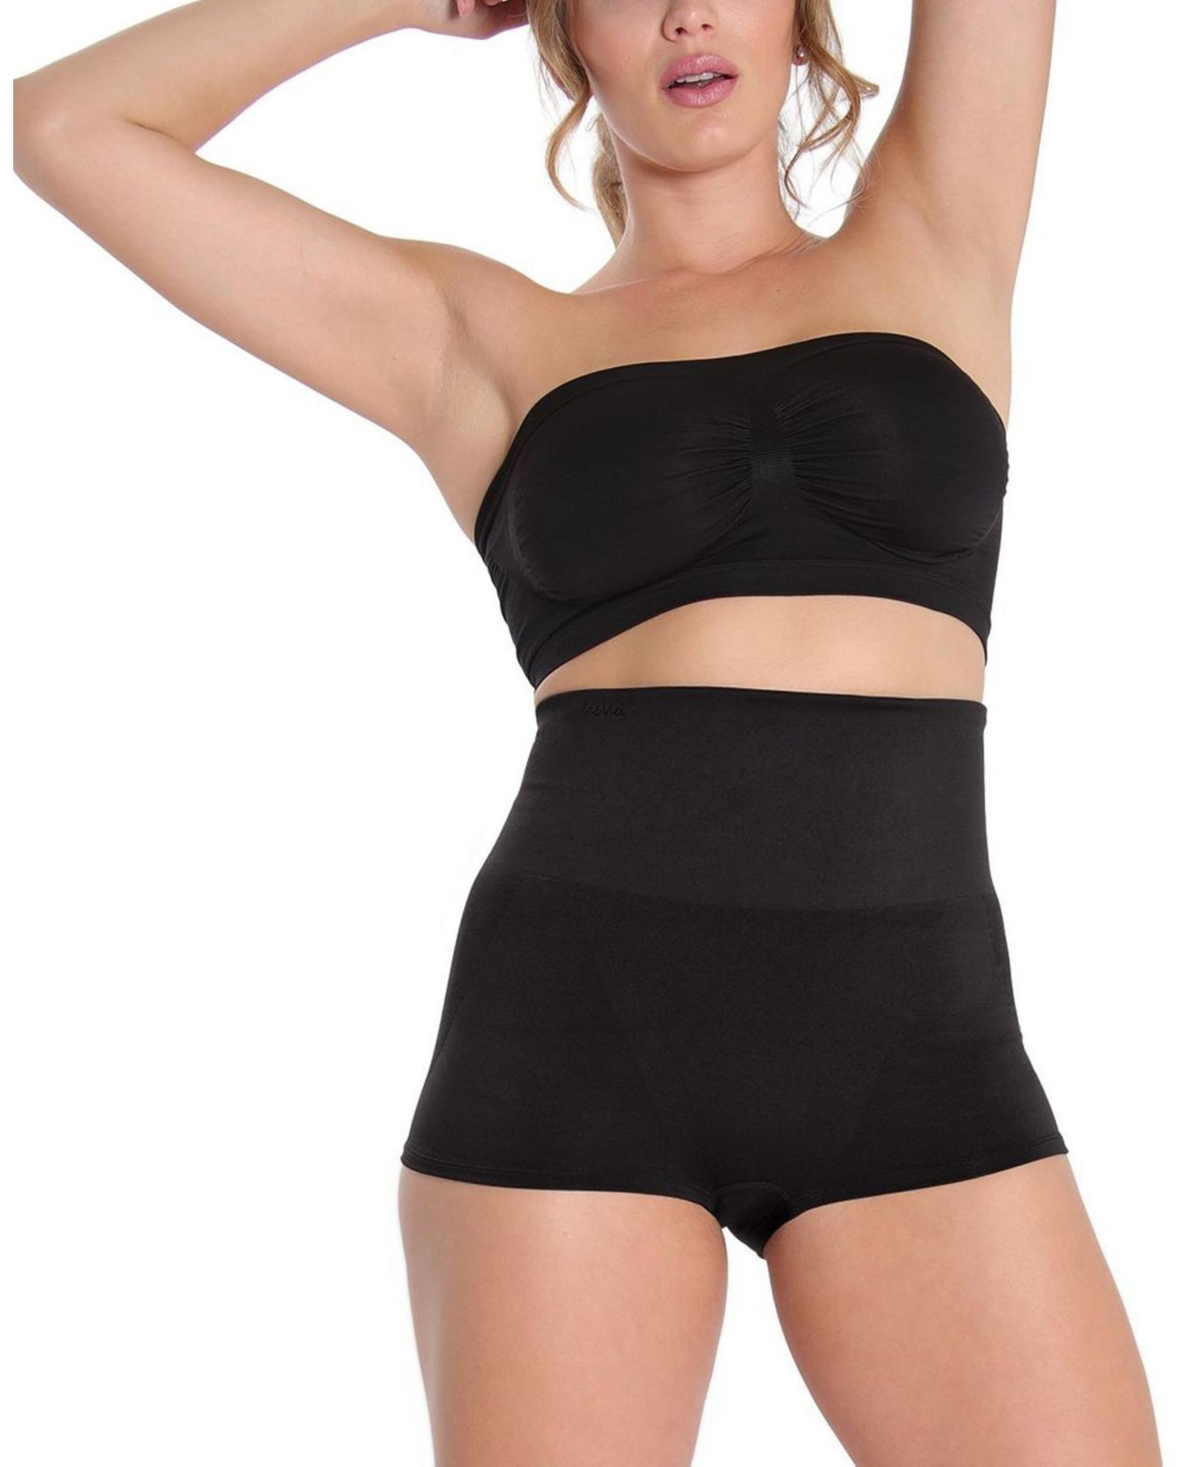 Memoi Plus Size High-waisted Seamless Shaping Boy Shorts In Black